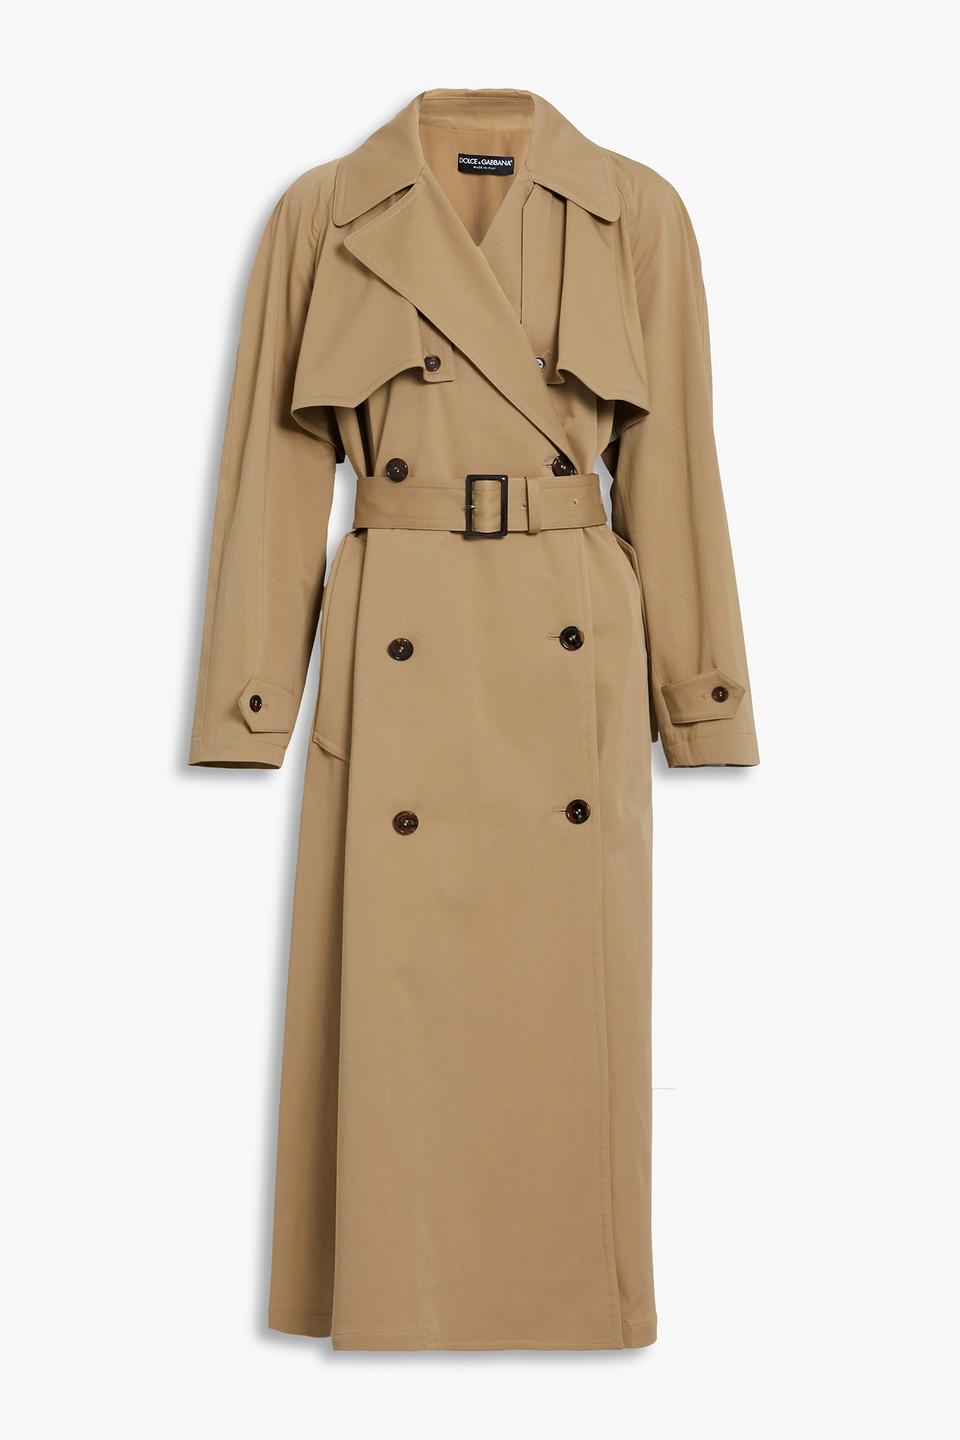 Dolce & Gabbana Belted Cotton-blend Gabardine Trench Coat in Natural | Lyst